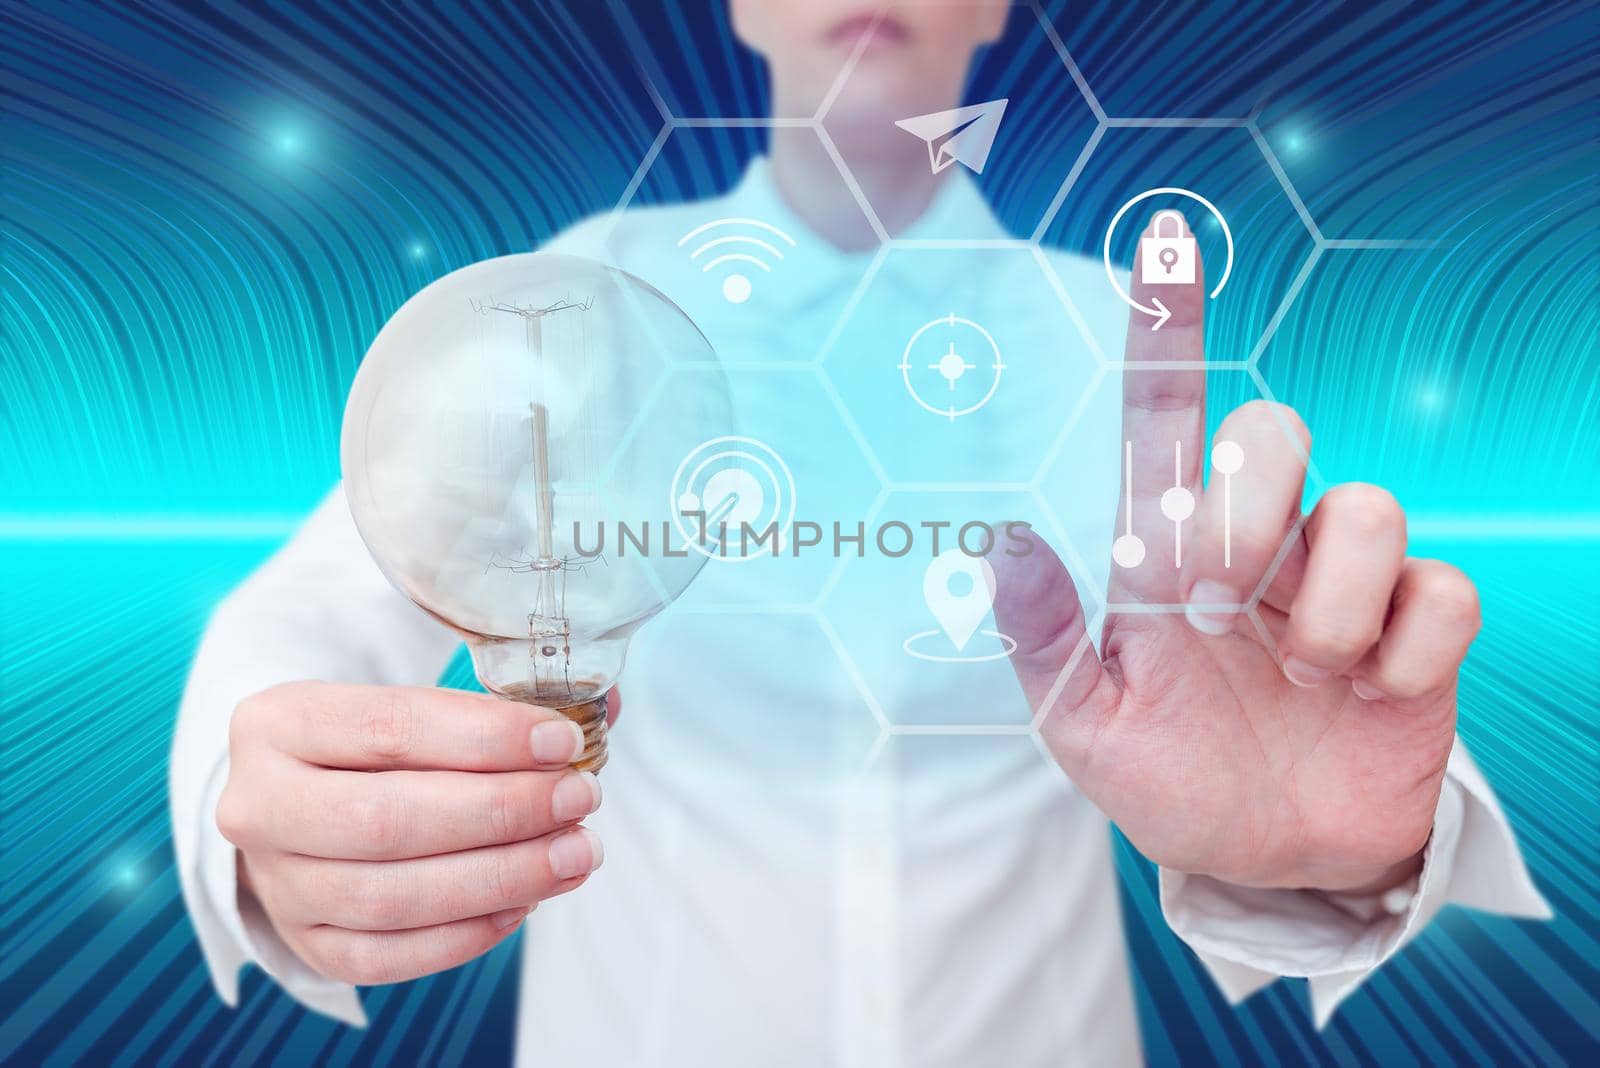 Lady holding light bulb pointing finger upwards symbolizing successful teamwork accomplishing newest project plans. Woman holds lamp representing combined effort management. by nialowwa